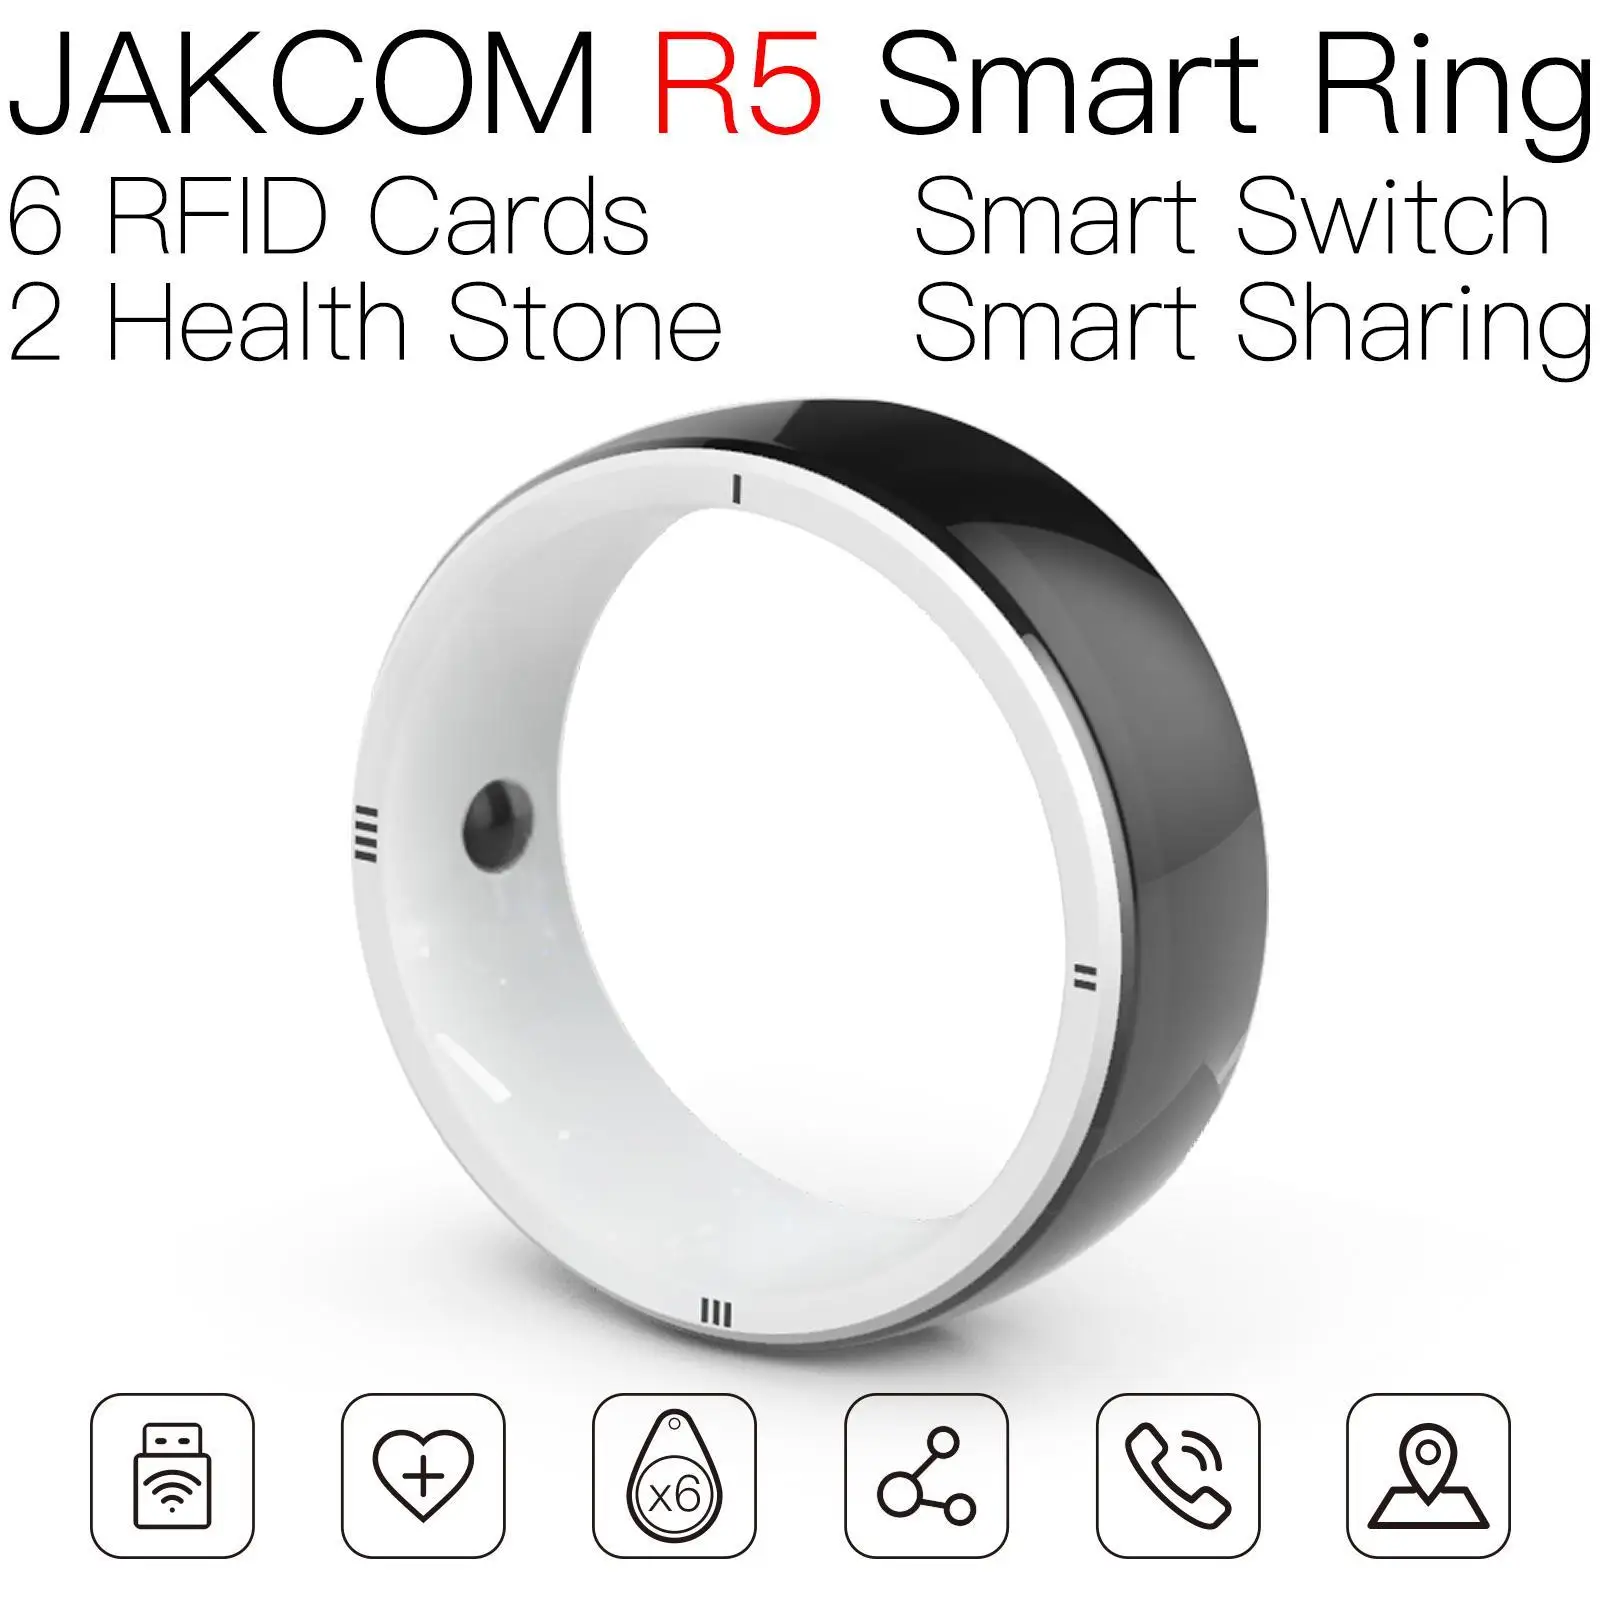 

JAKCOM R5 Smart Ring Newer than nfc tag 100pcs personalized card bamboo chip reader for animals sa828 uhf tmd 5s transponder